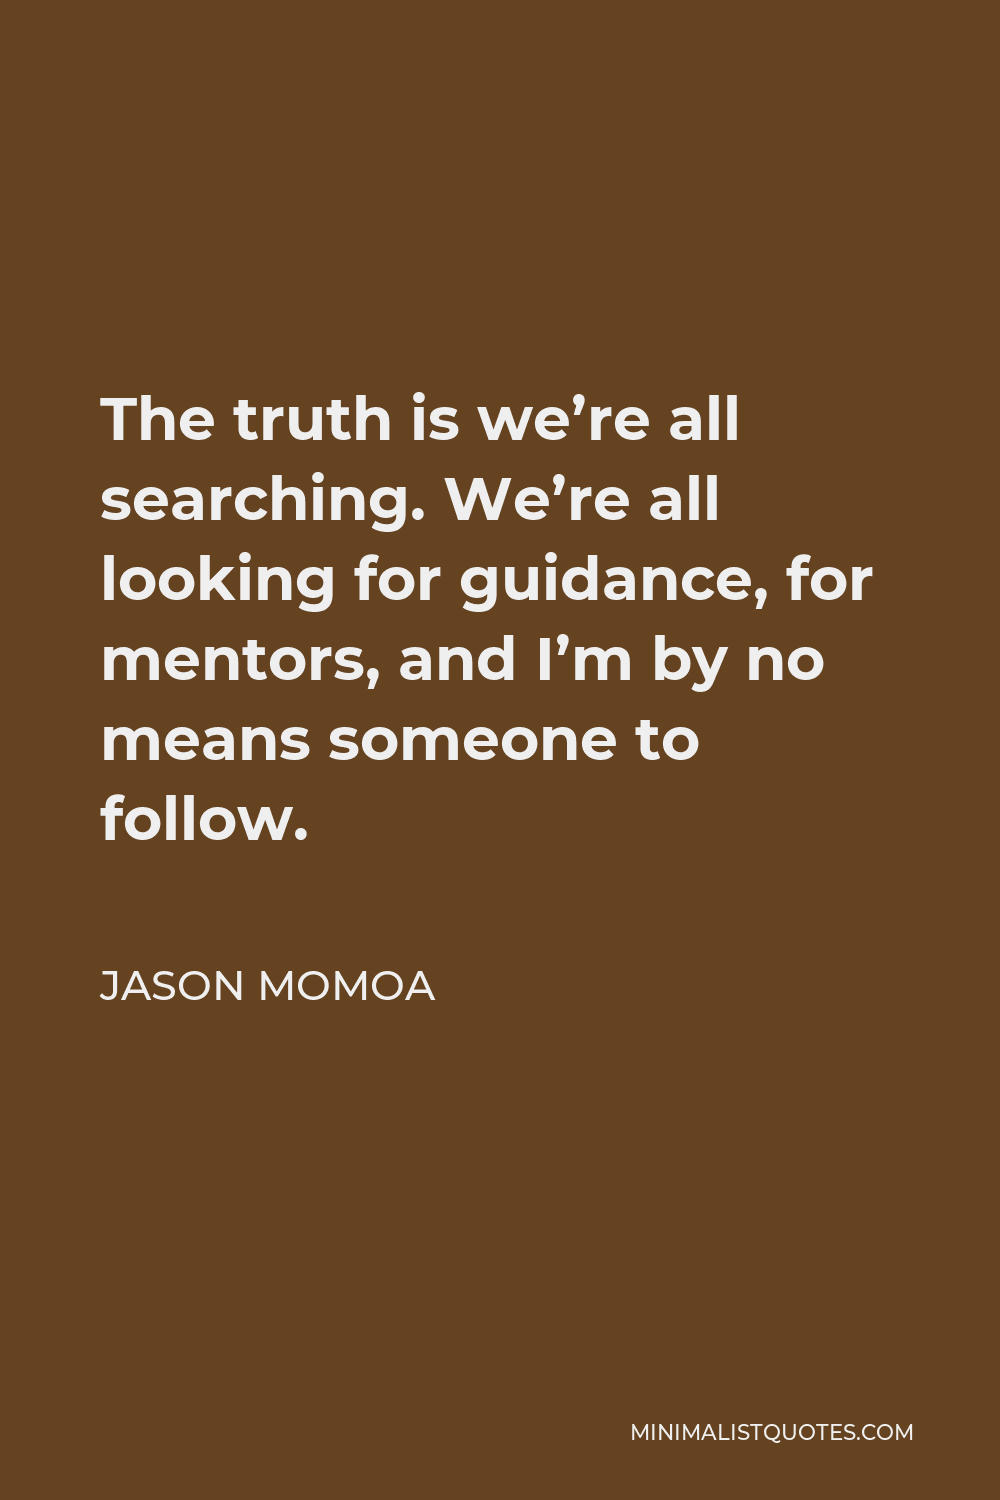 Jason Momoa Quote - The truth is we’re all searching. We’re all looking for guidance, for mentors, and I’m by no means someone to follow.